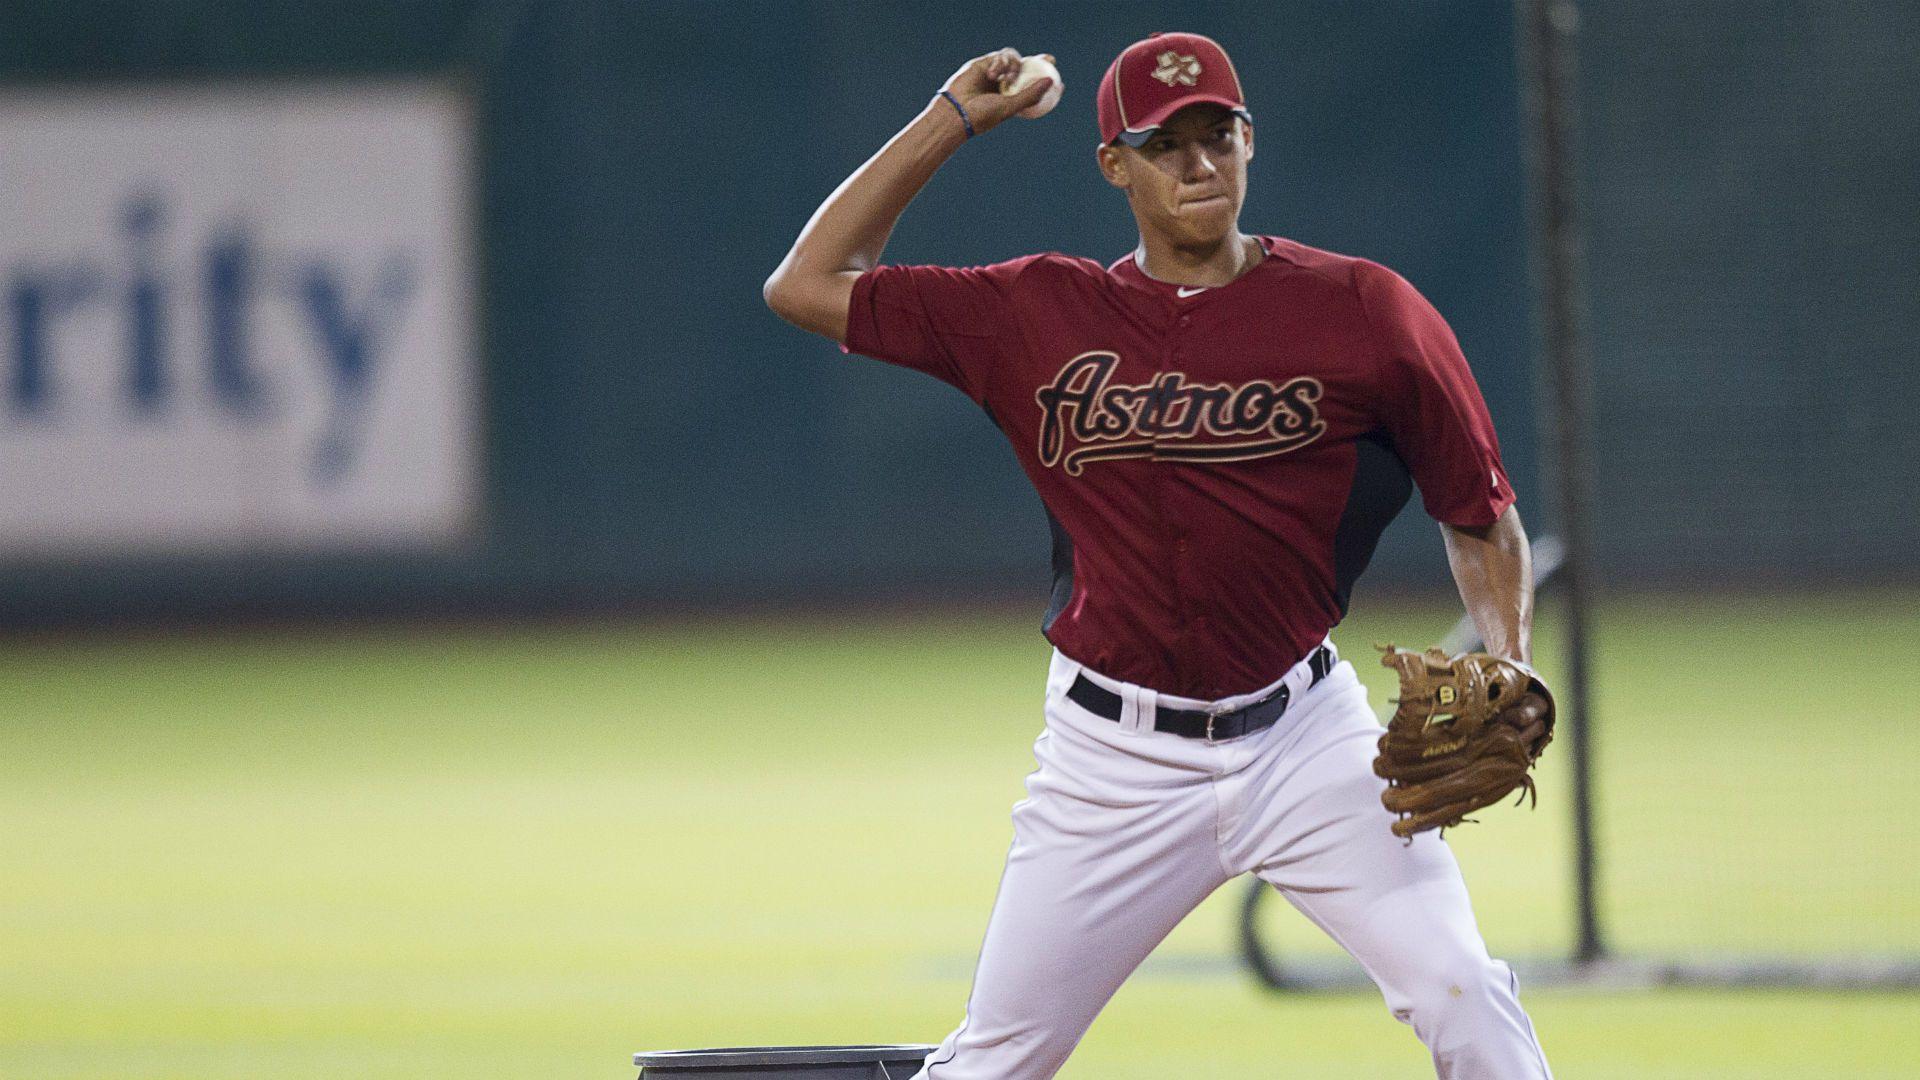 Scouting the Prospects: Correa could star for Astros.